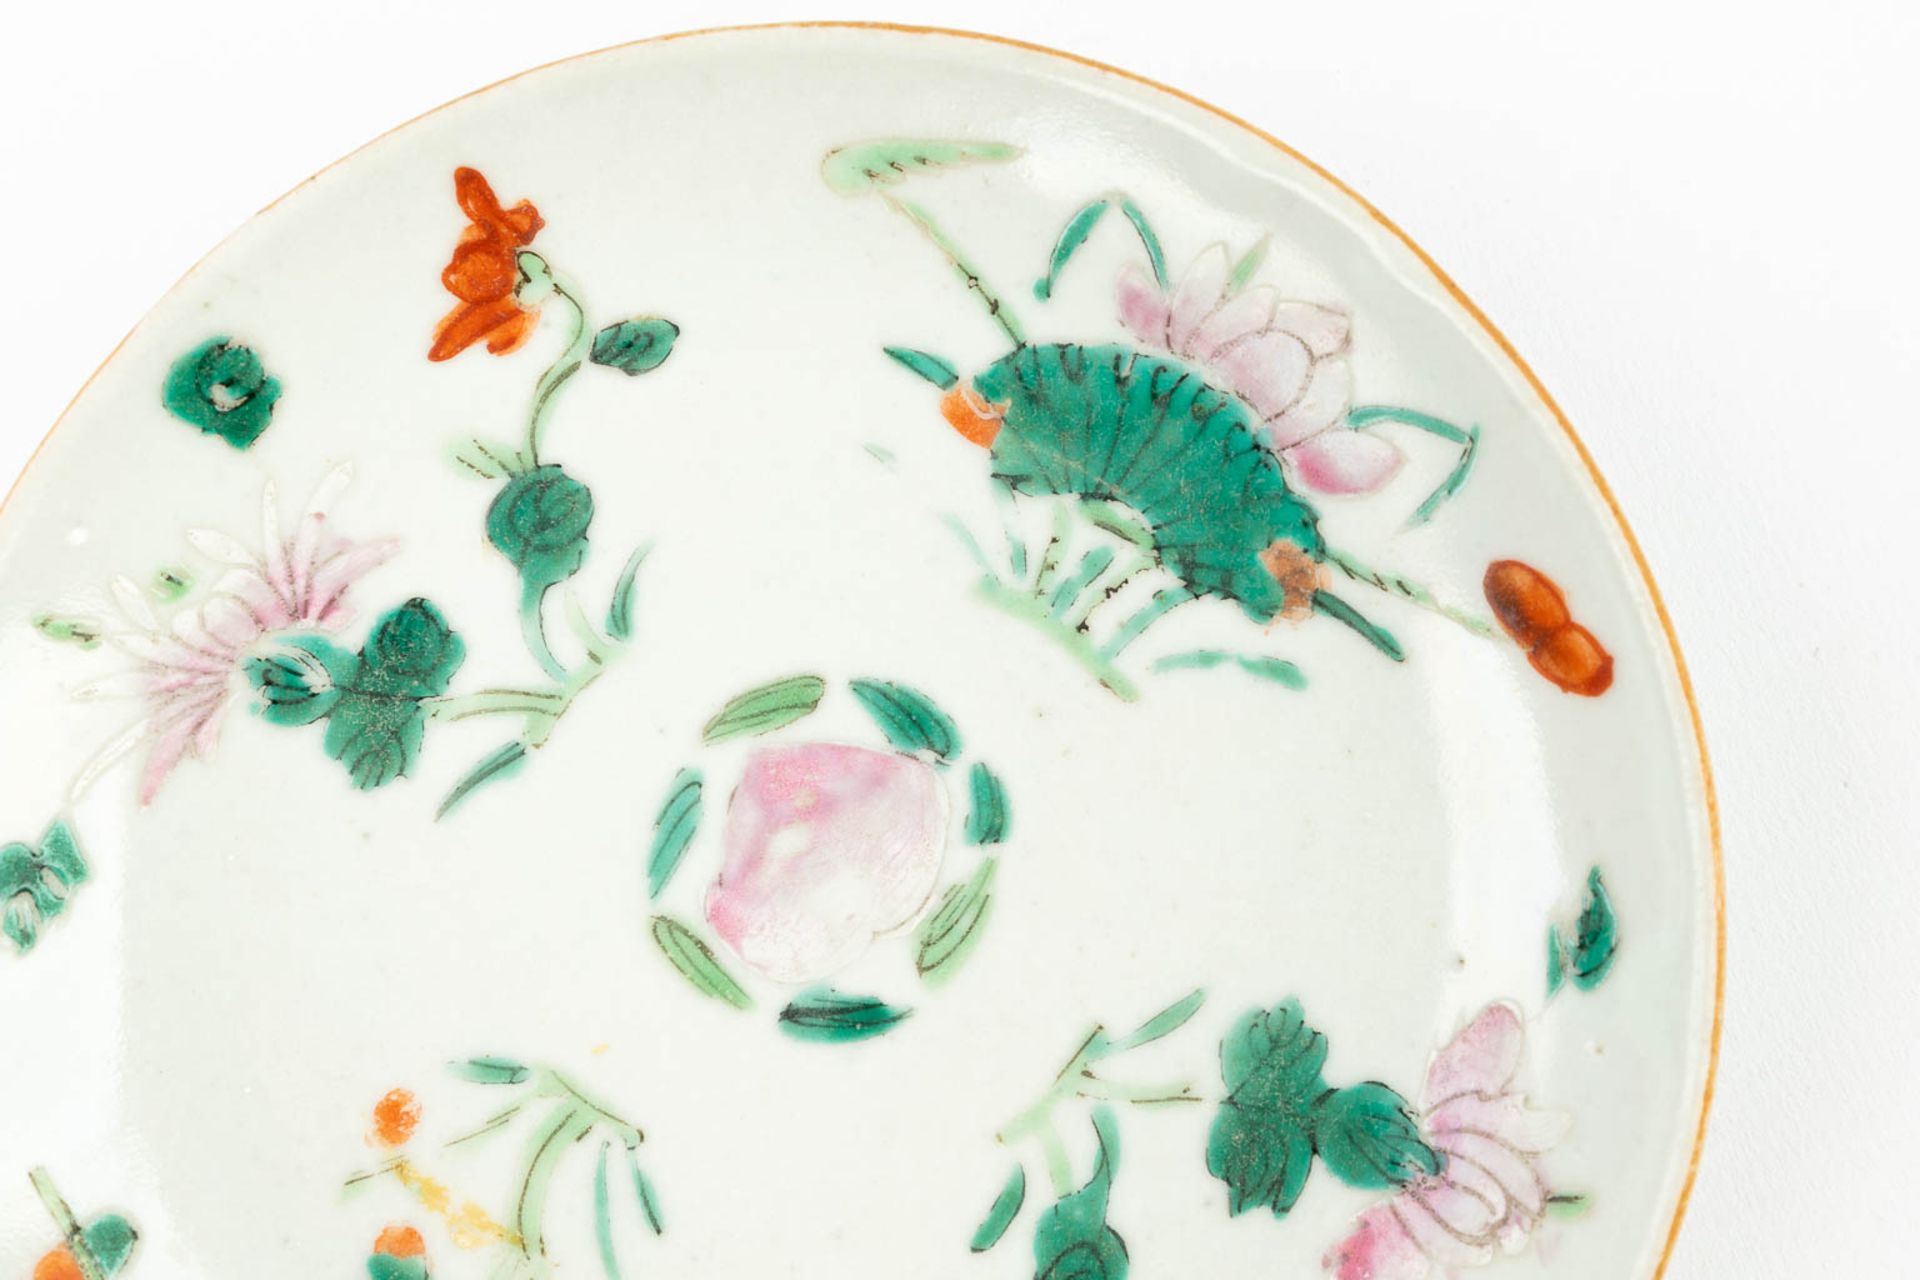 A set of 4 Chinese plates made of porcelain and decorated with peaches and flowers. (13,7 cm) - Image 13 of 14